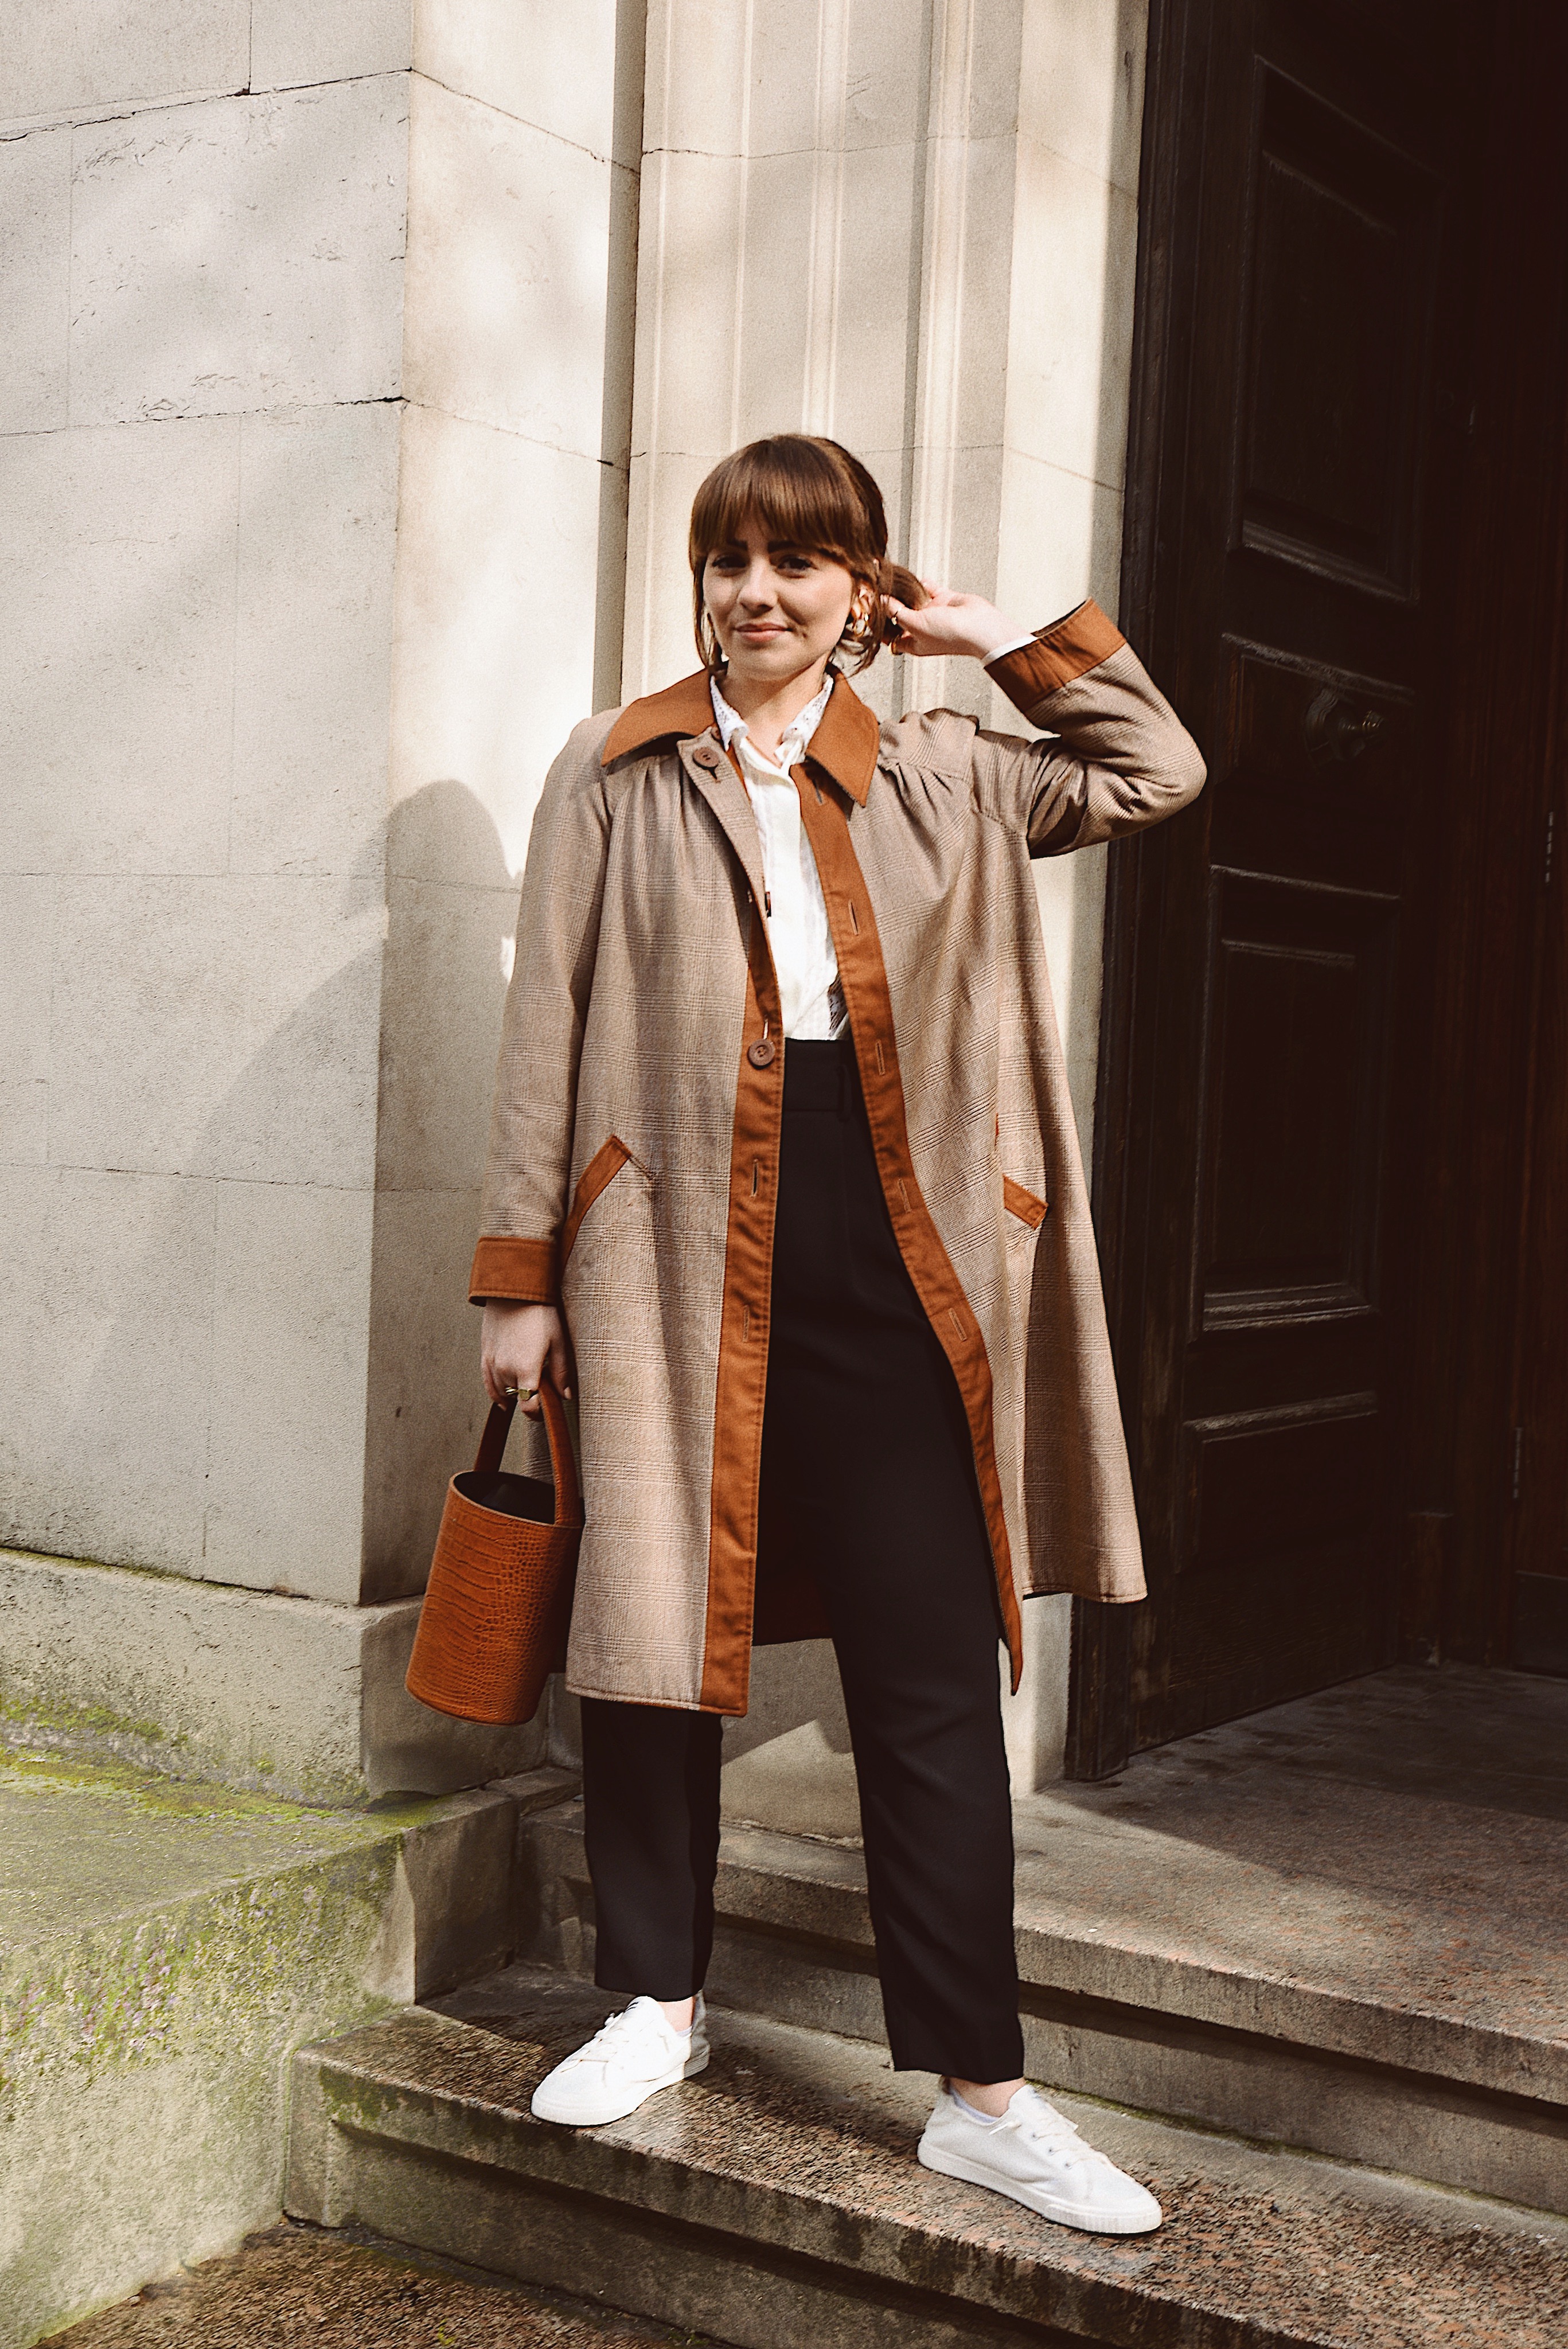 Vintage Trench Coats and Dresses